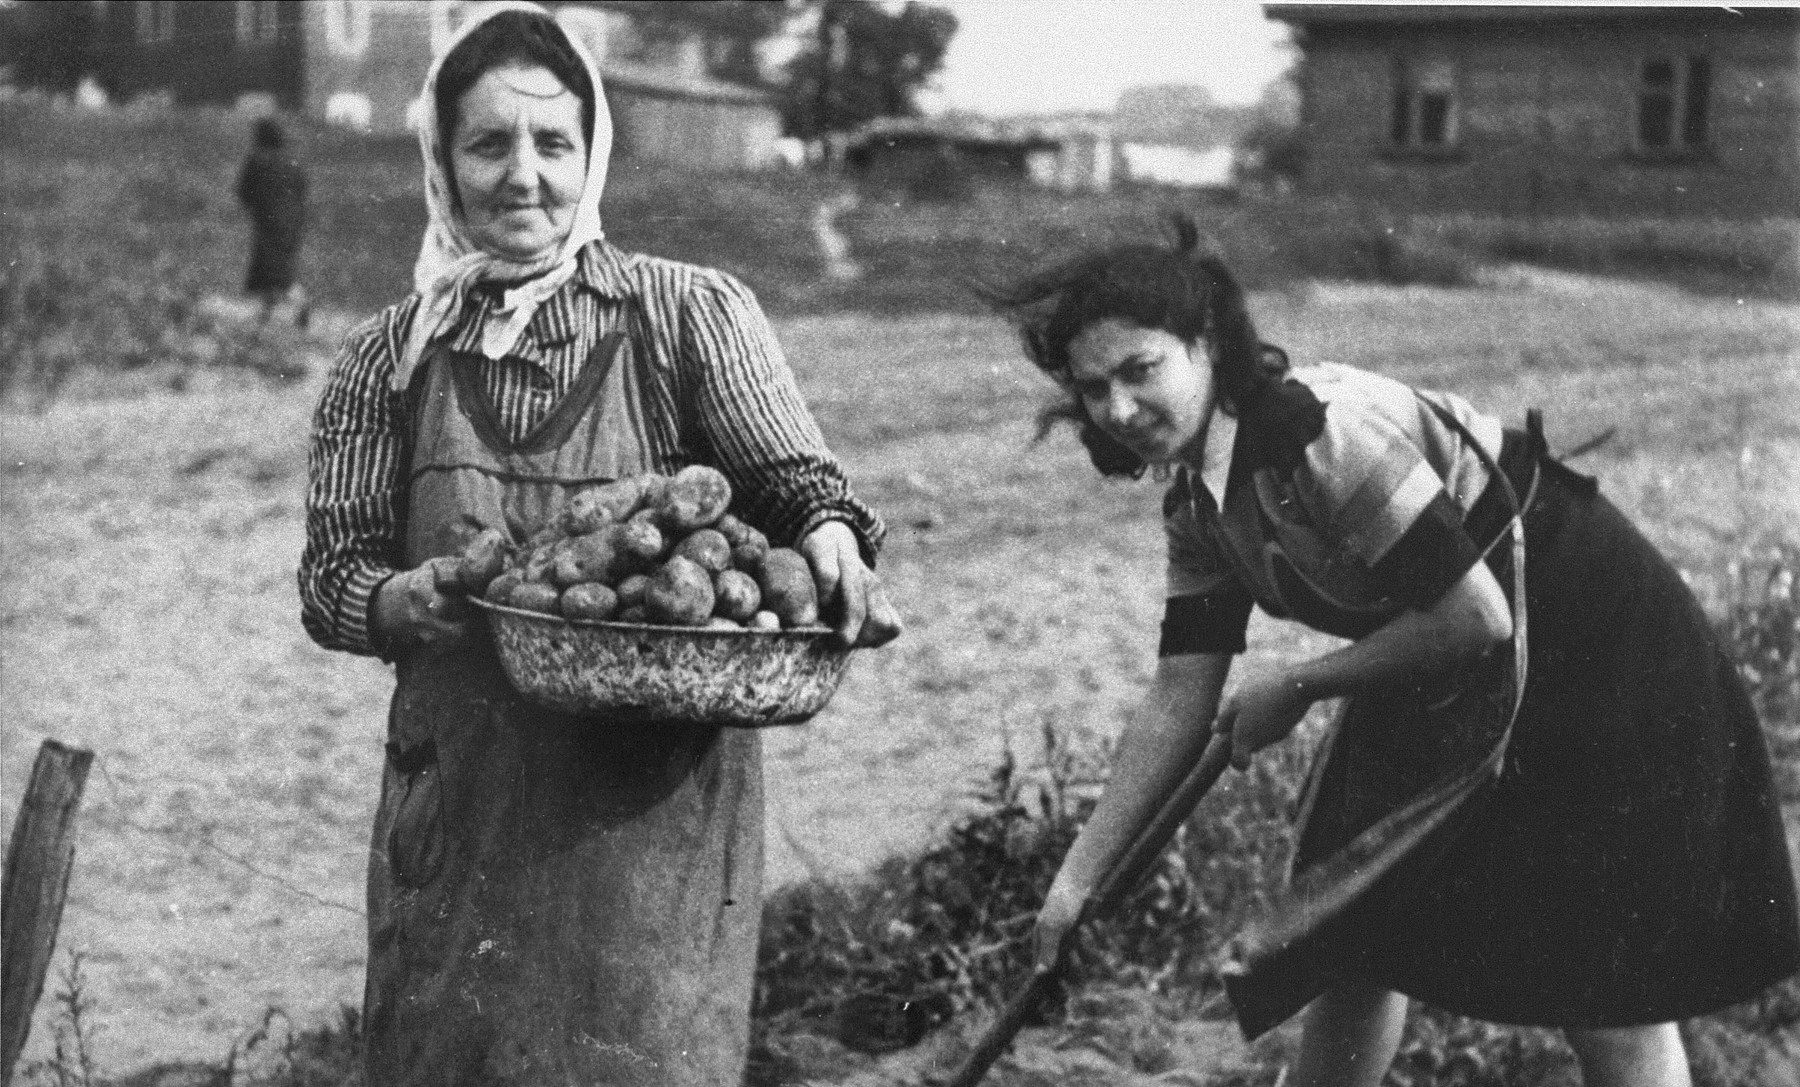 Two women collect potatoes on an agricultural plot in the Kovno ghetto.